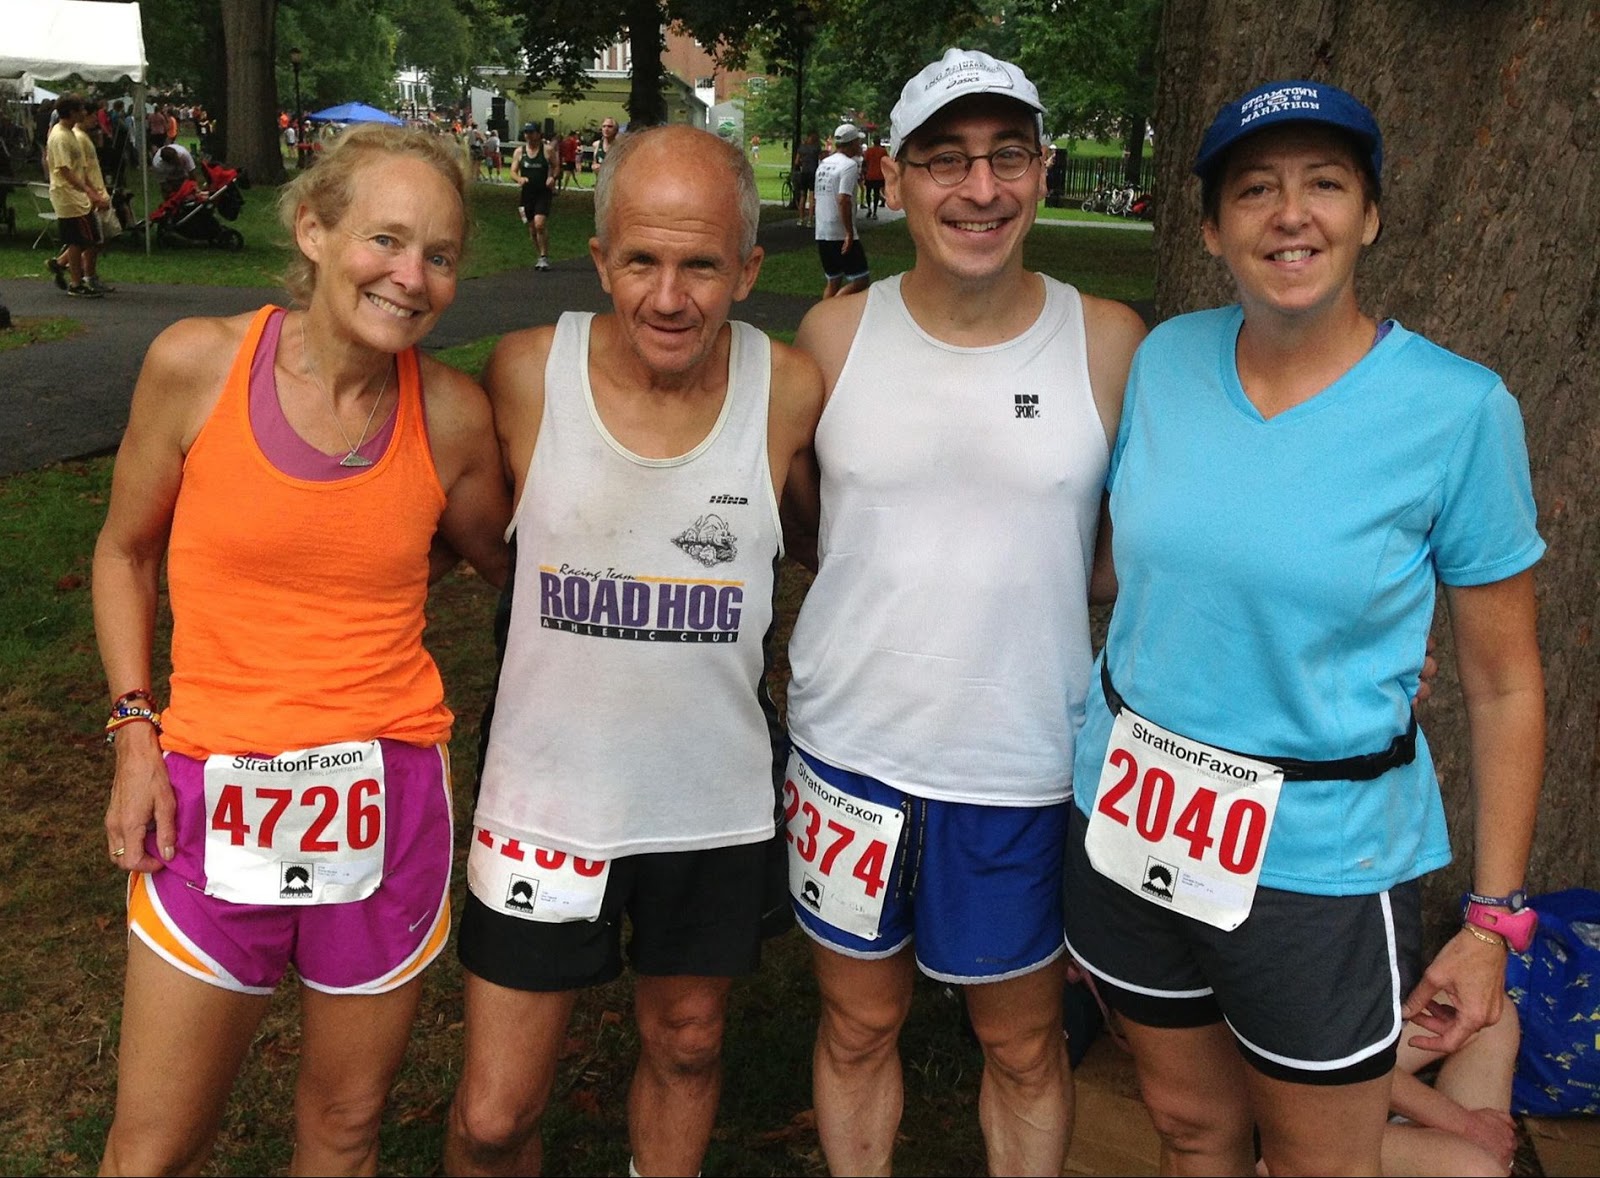 rundangerously: 2013 new haven road race 20k: photos & results